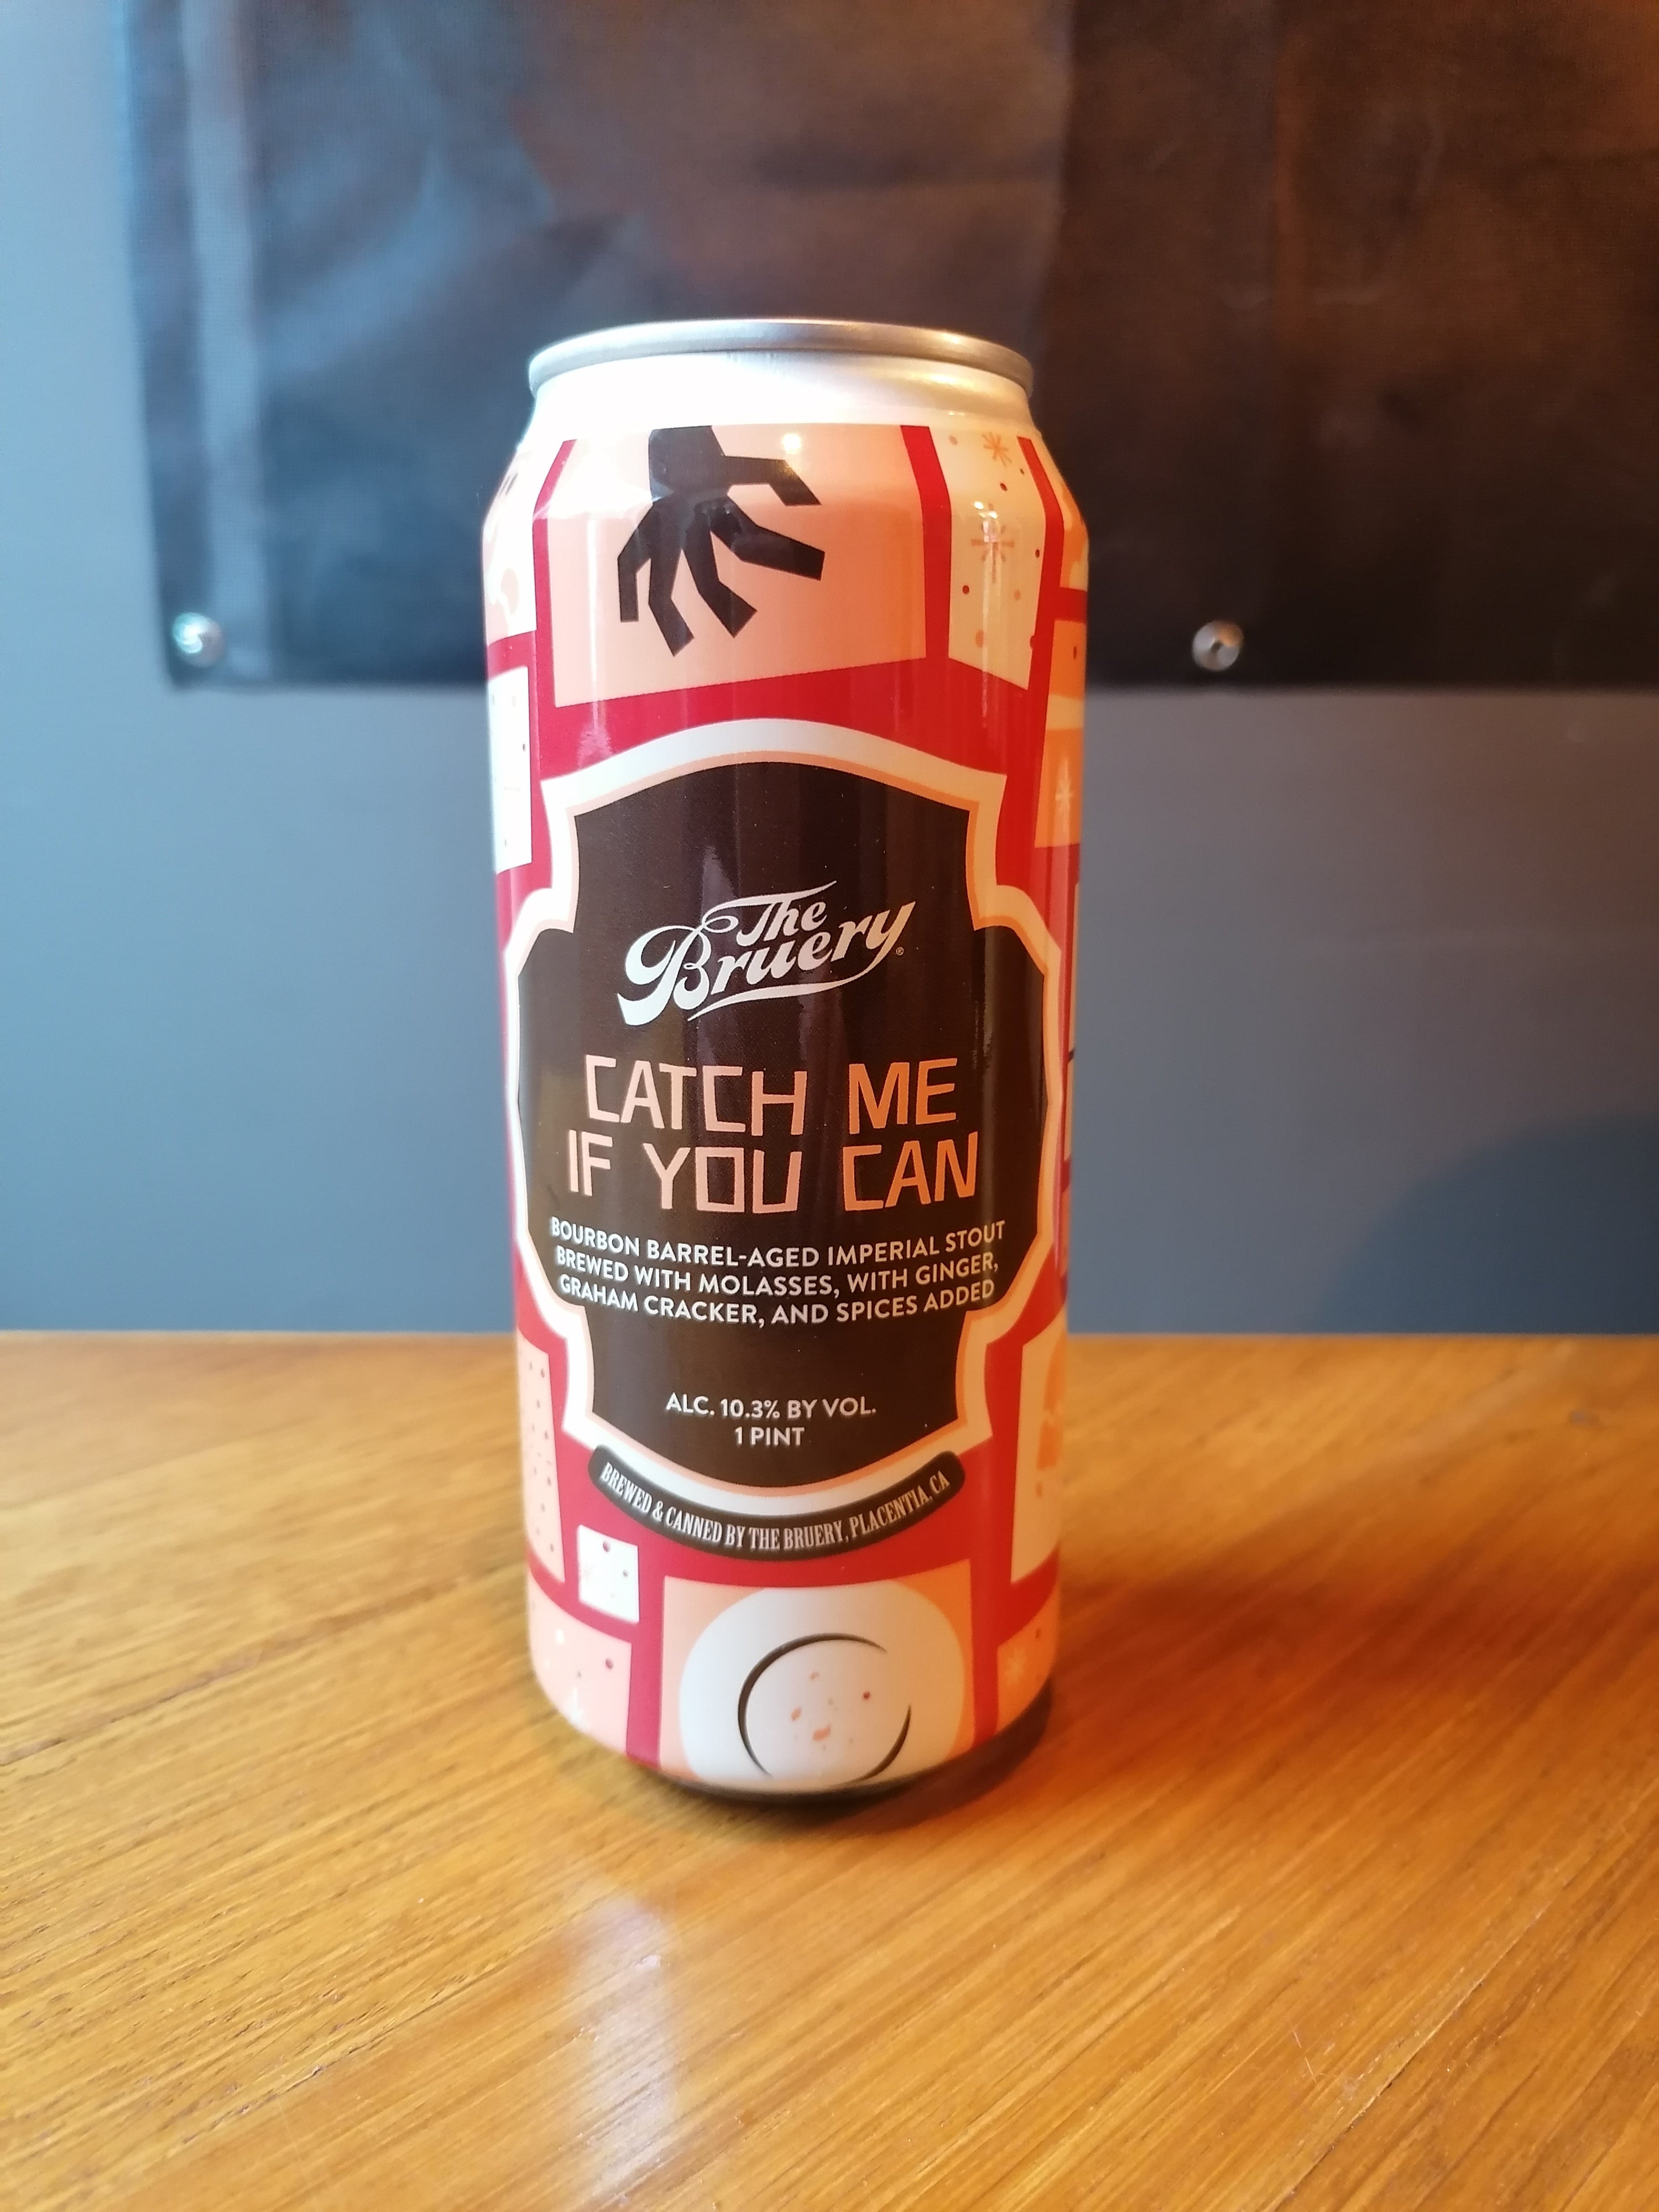 Billede af The Bruery "Catch Me If You Can" | 10,3% | 47,3cl | Imperial Stout Double Pastry